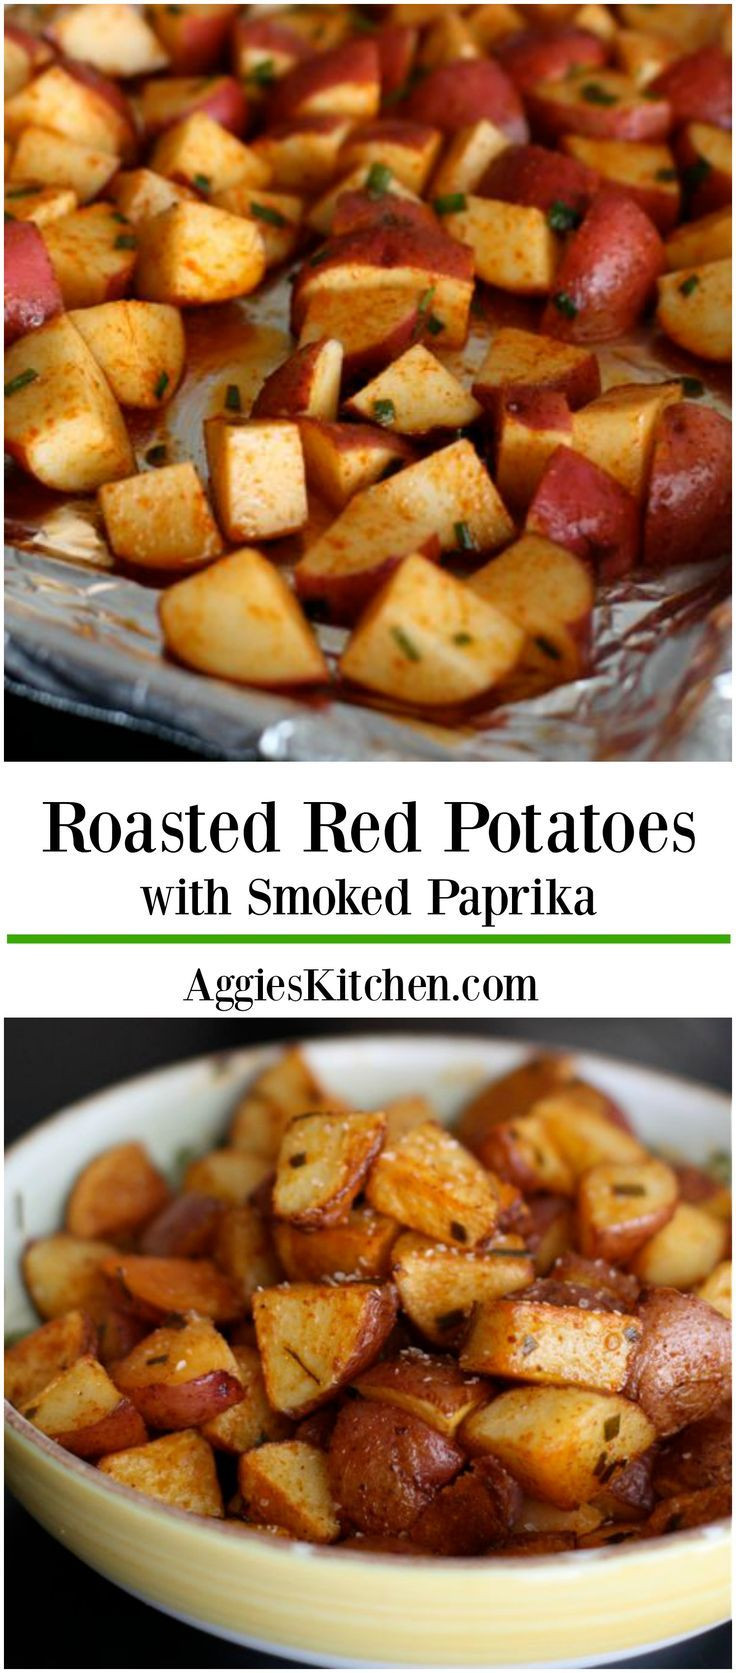 Are Roasted Potatoes Healthy
 Roasted Red Potatoes with Smoked Paprika Recipe